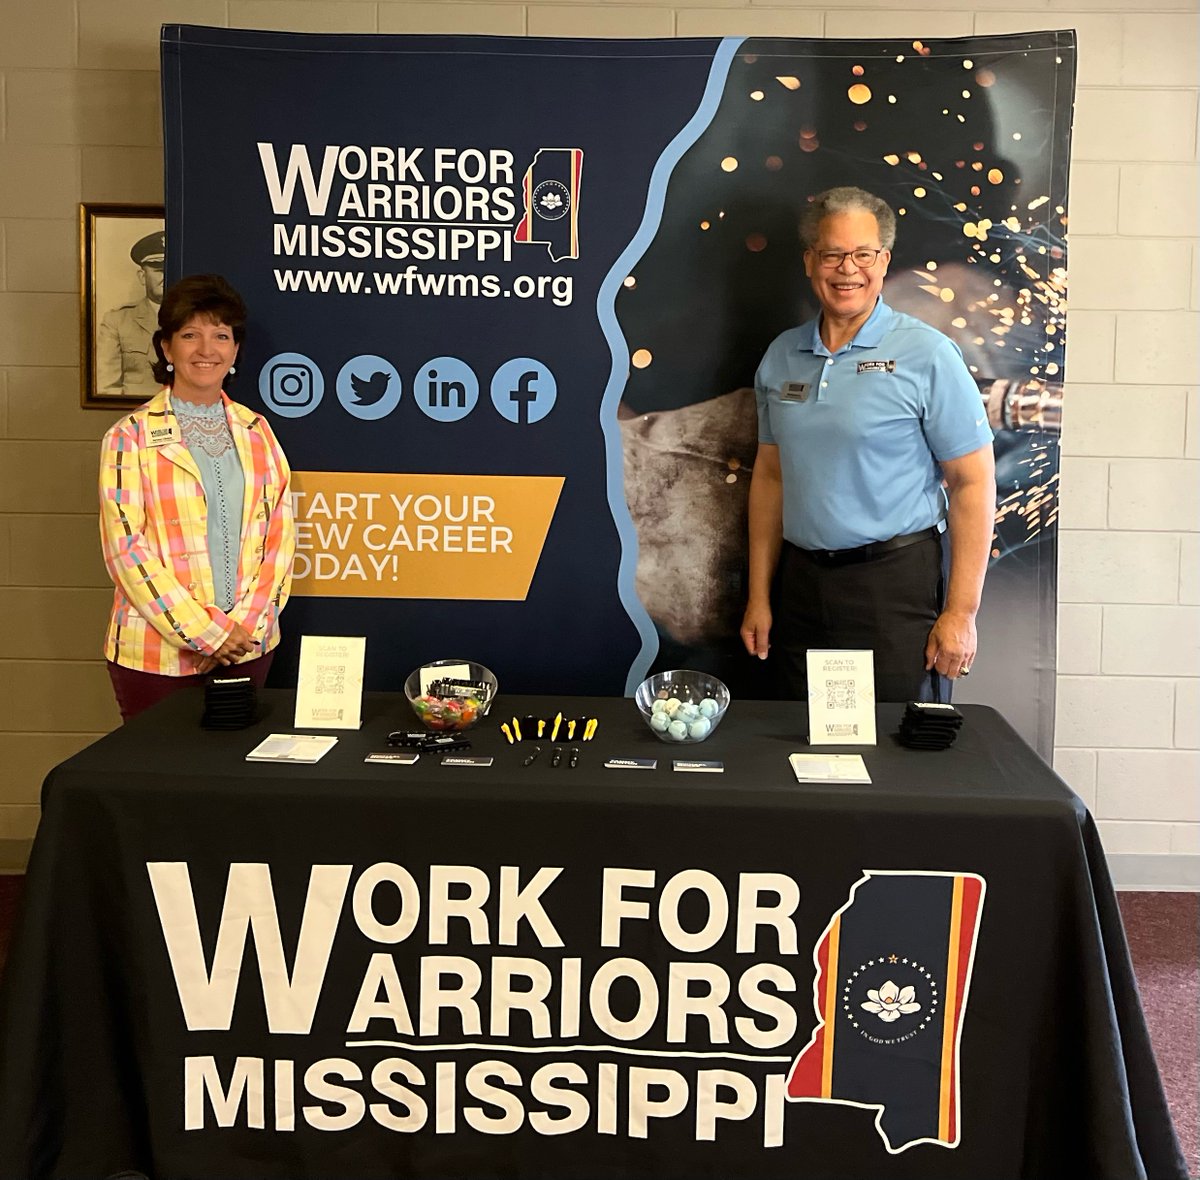 Our team has been on the road! Employment Coordinator Tammy Clinton and Career Technical Specialist Michael McGee spoke with members at Camp Shelby last week.

#wfwms #workforwarriors #hiring #militaryjobs #Mississippi #employment #career